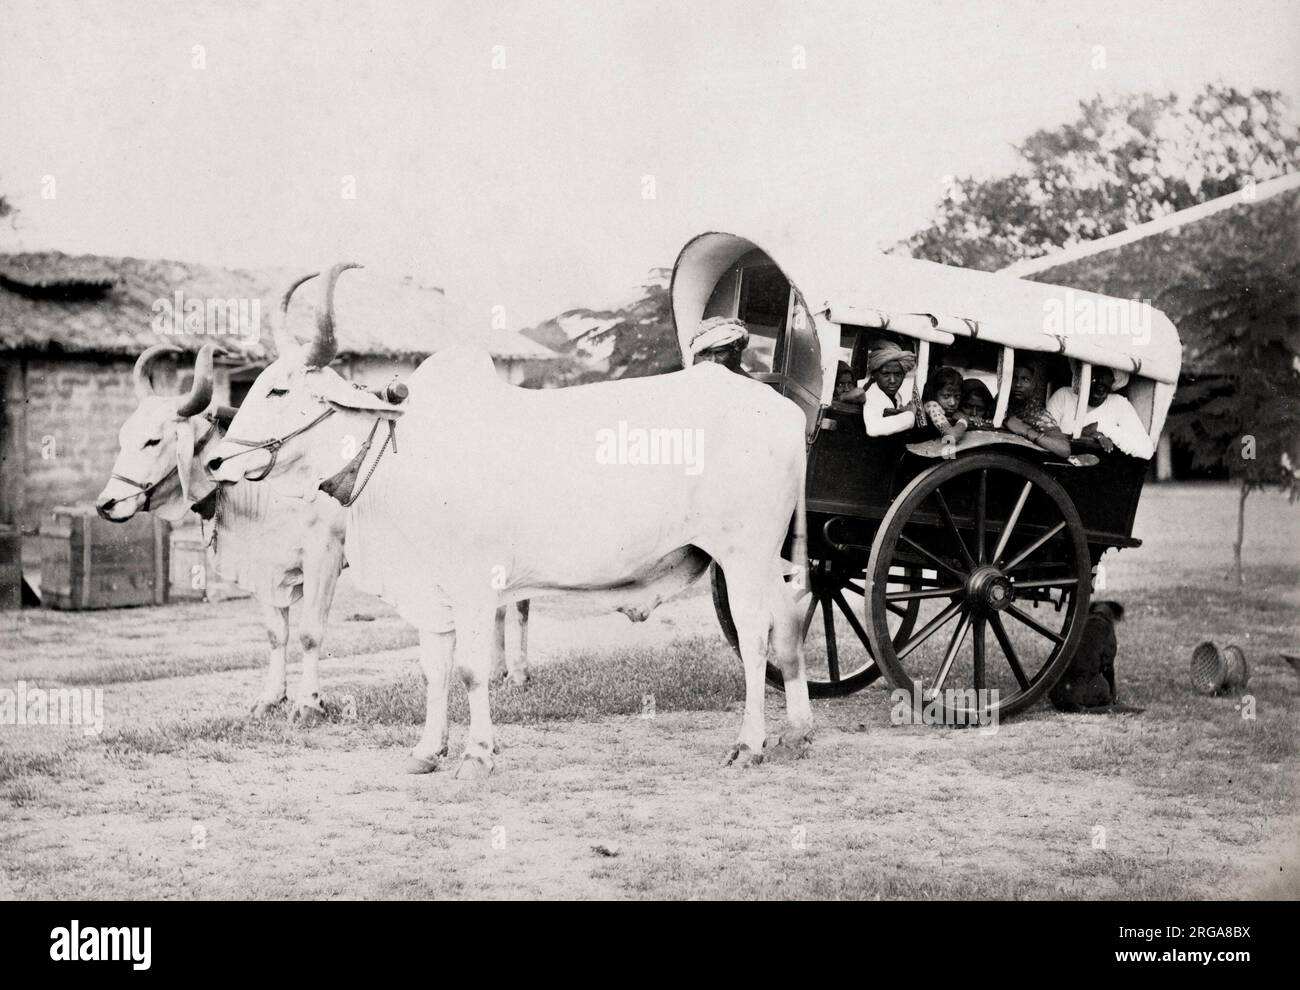 Covered ox cart for transporting people, gharry, gharri, country travel India. Vintage 19th century photograph. Stock Photo